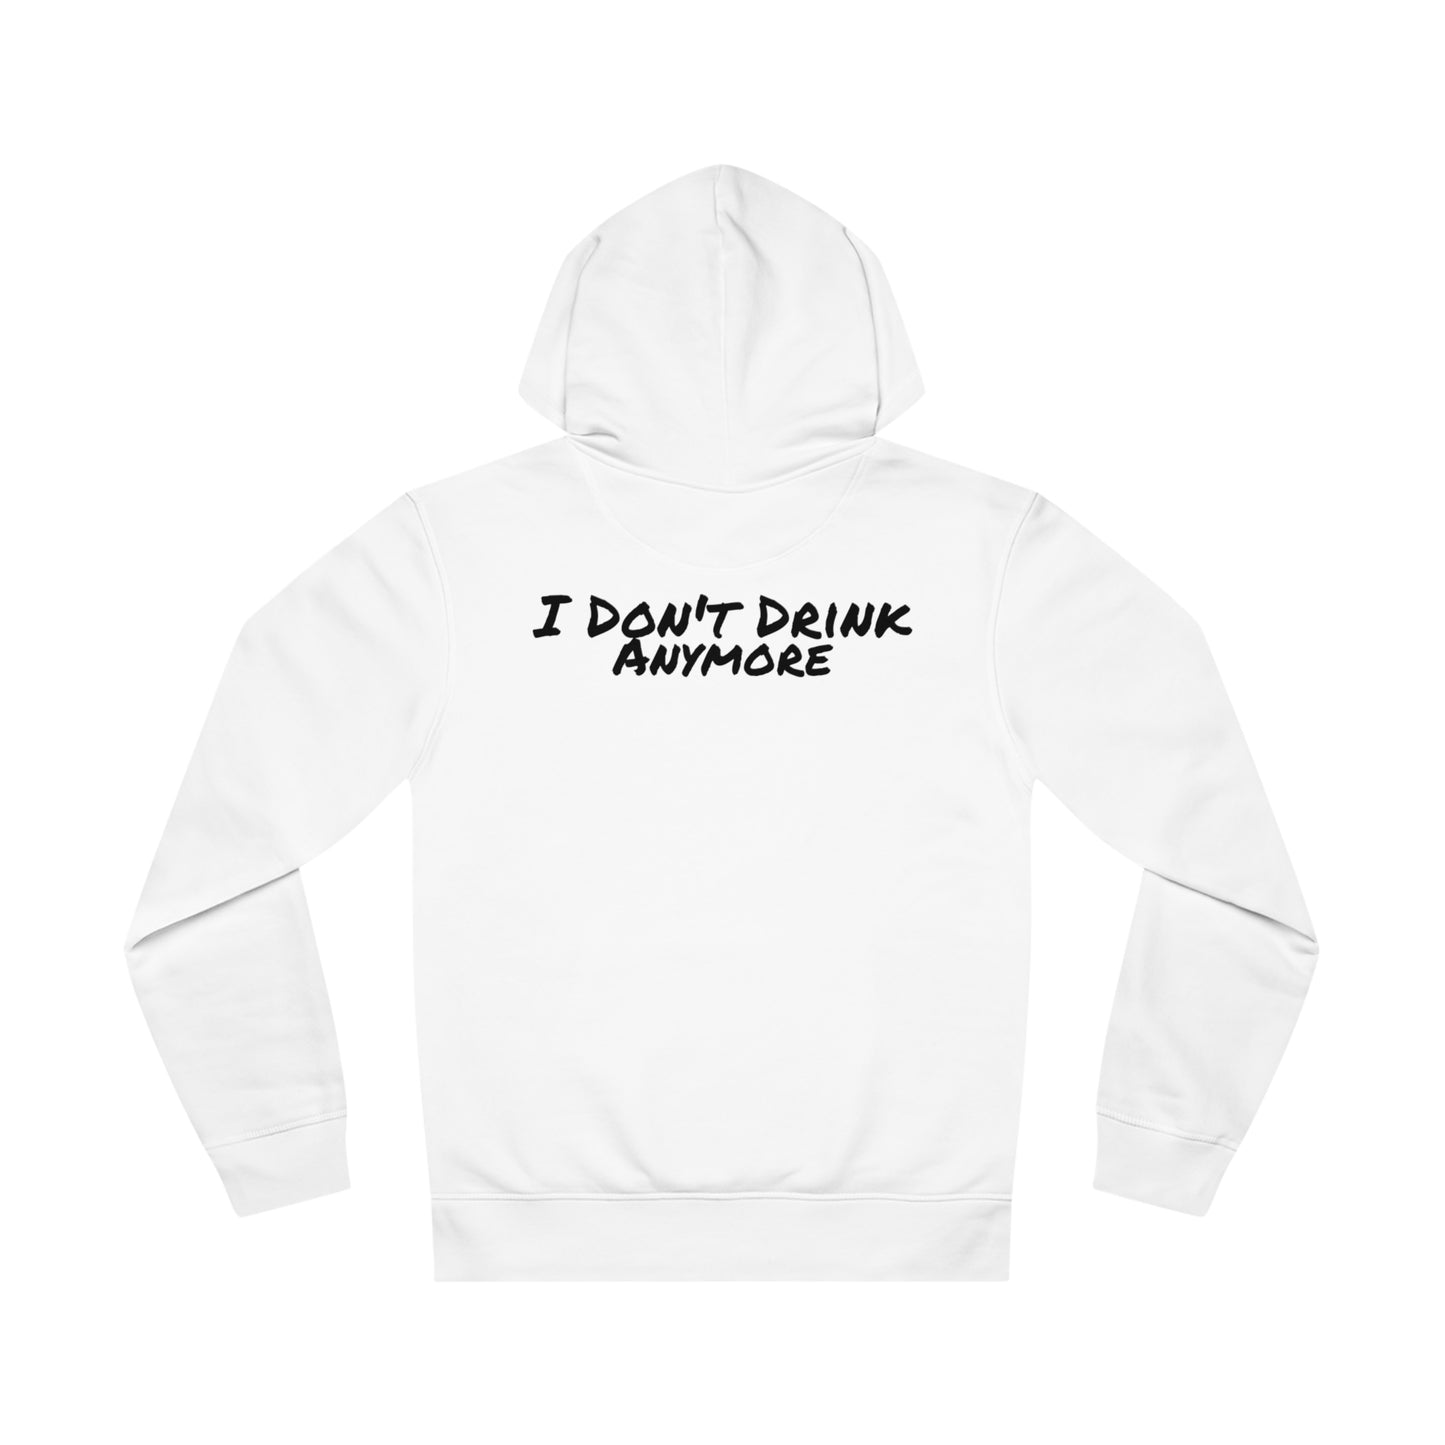 I Don't Drink Anymore Hoody (Front & Back)